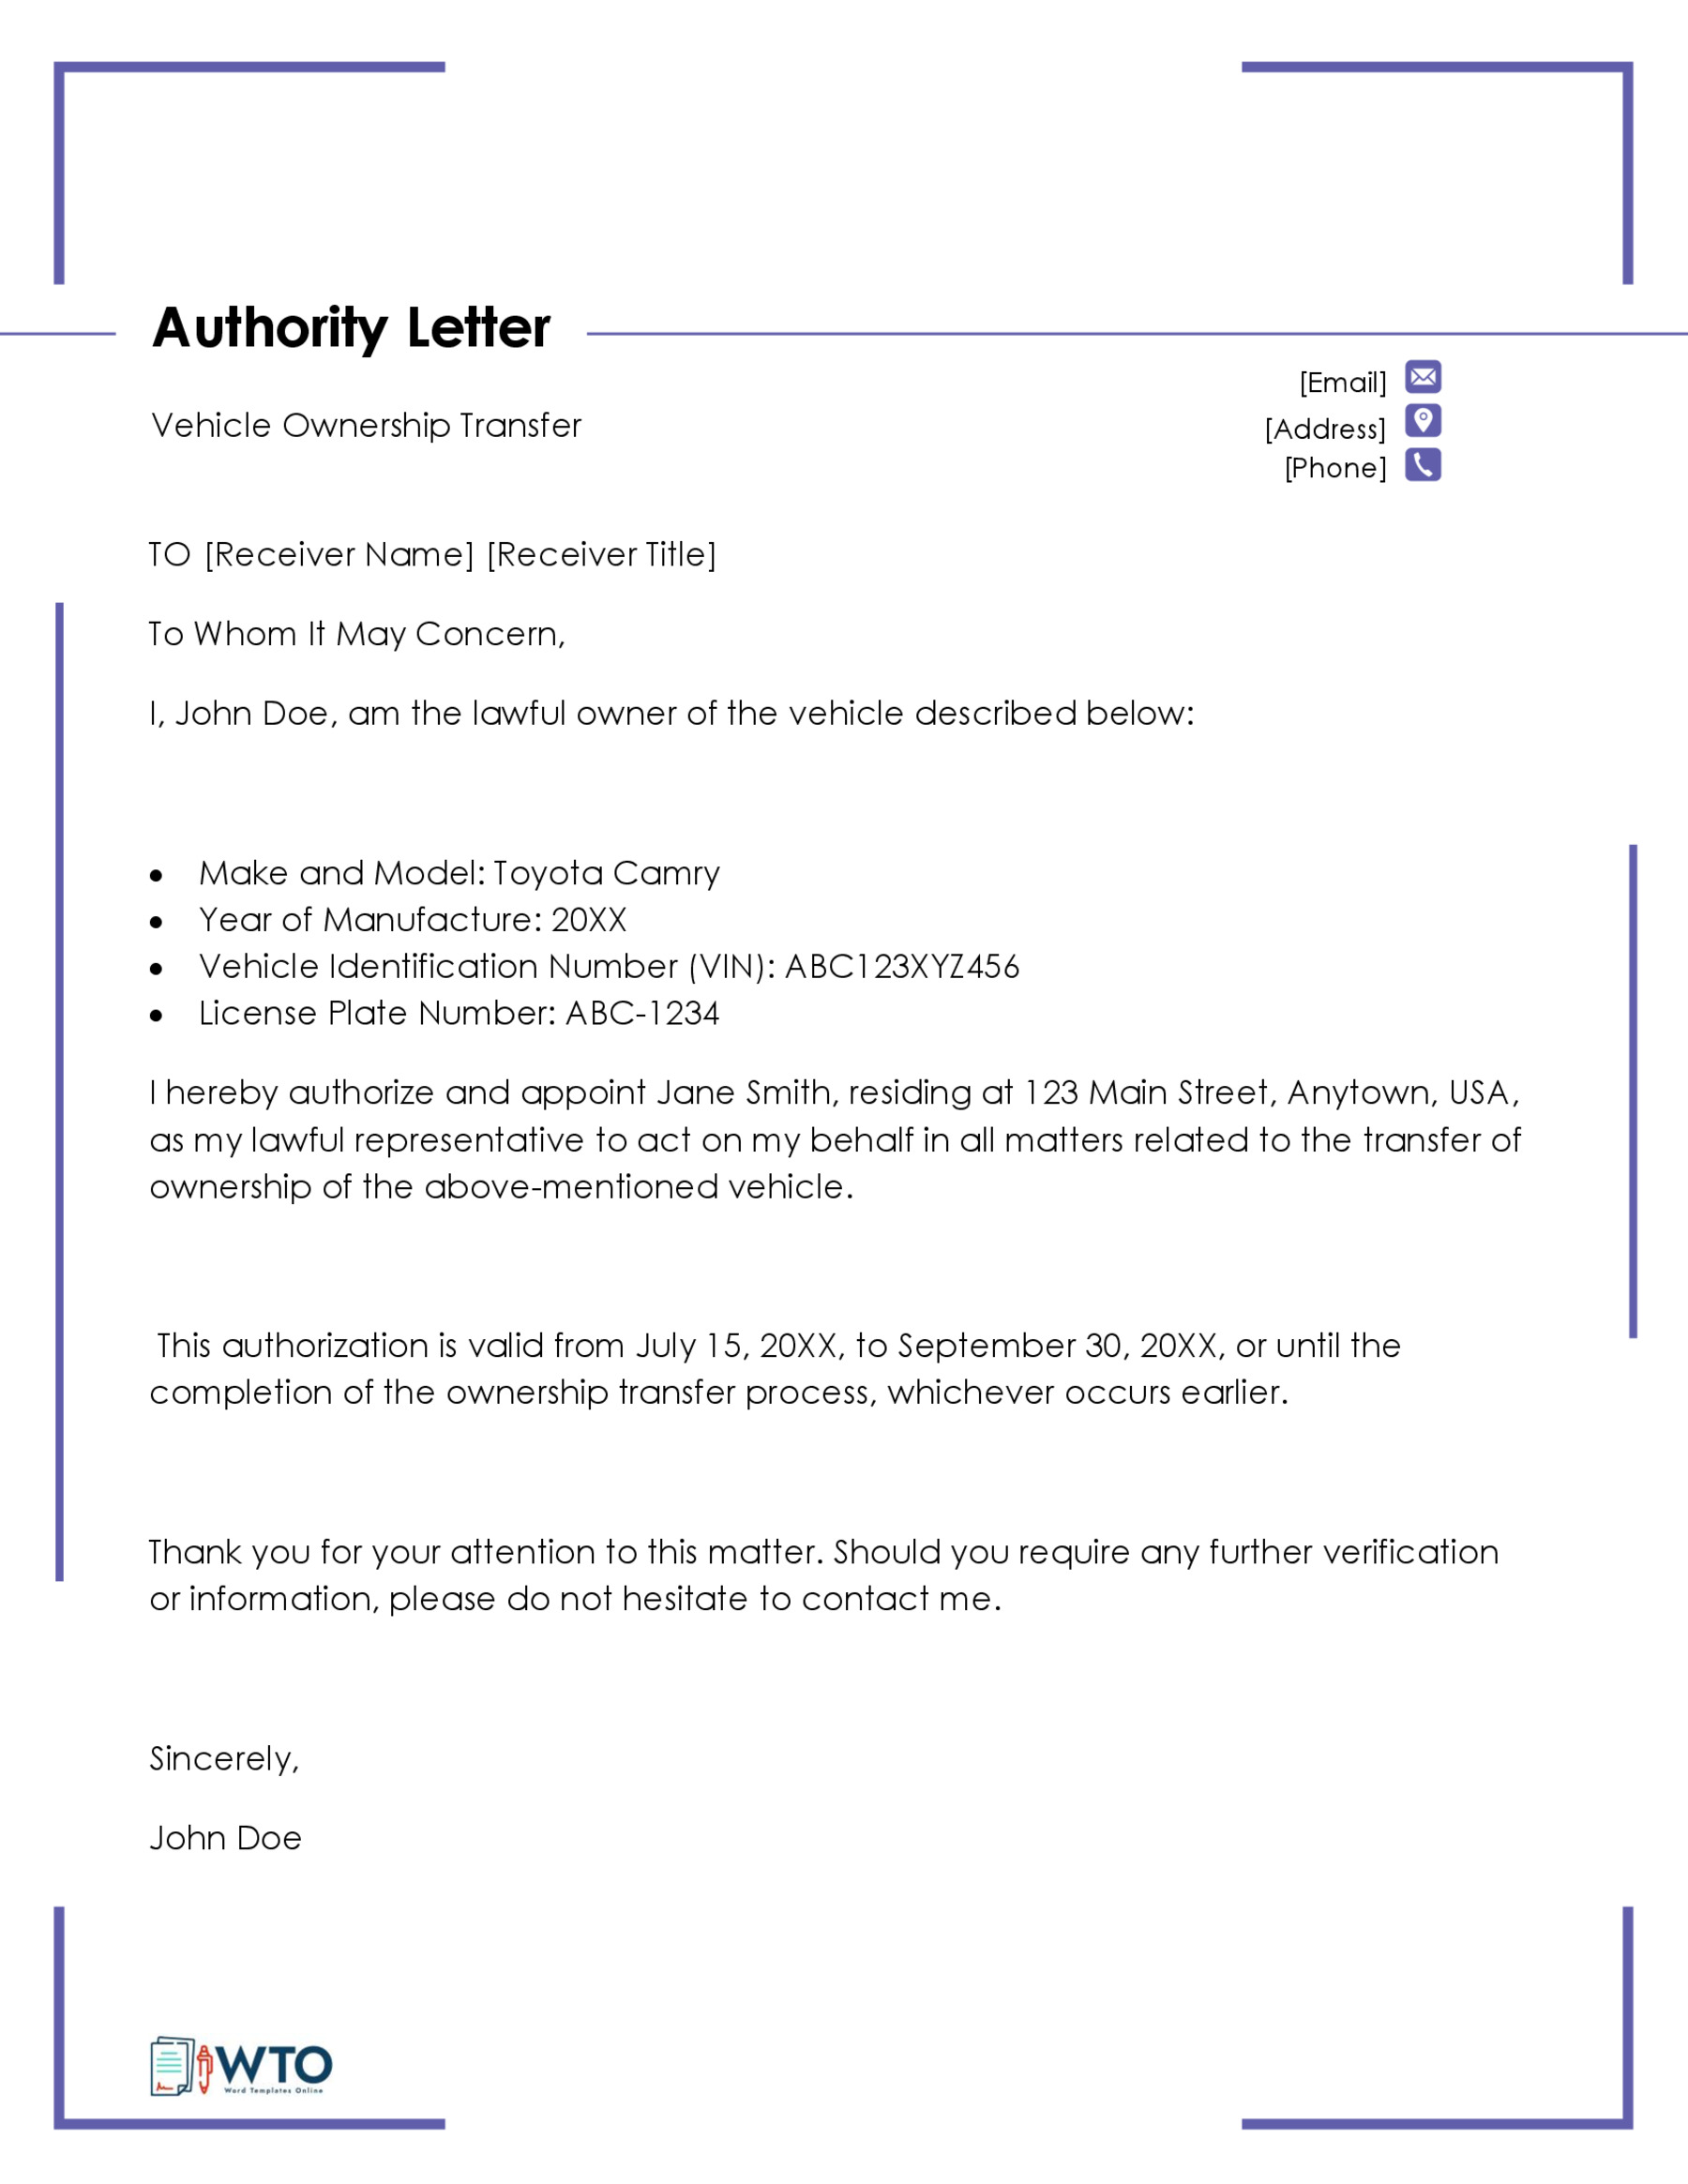 Authorization Letter Transfer Vehicle Ownership Letter Template-Ms Word Free